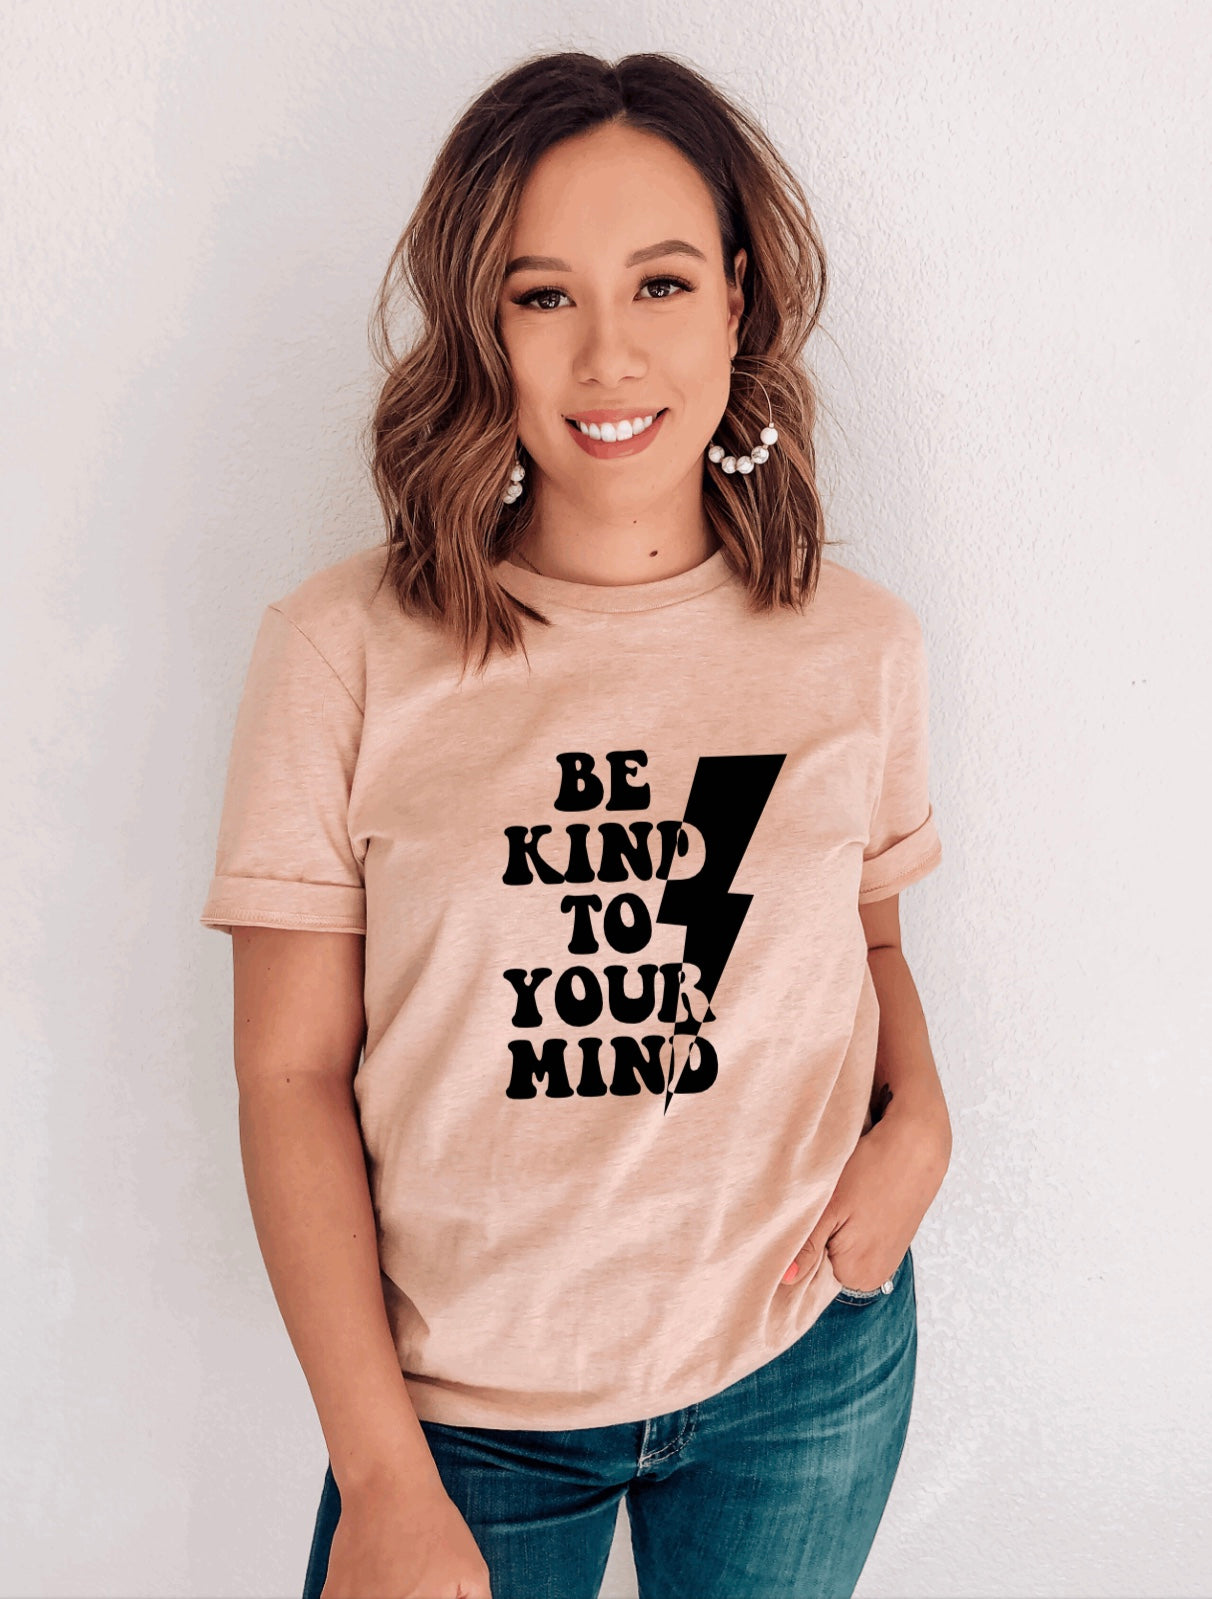 Be kind to your mind t-shirt 